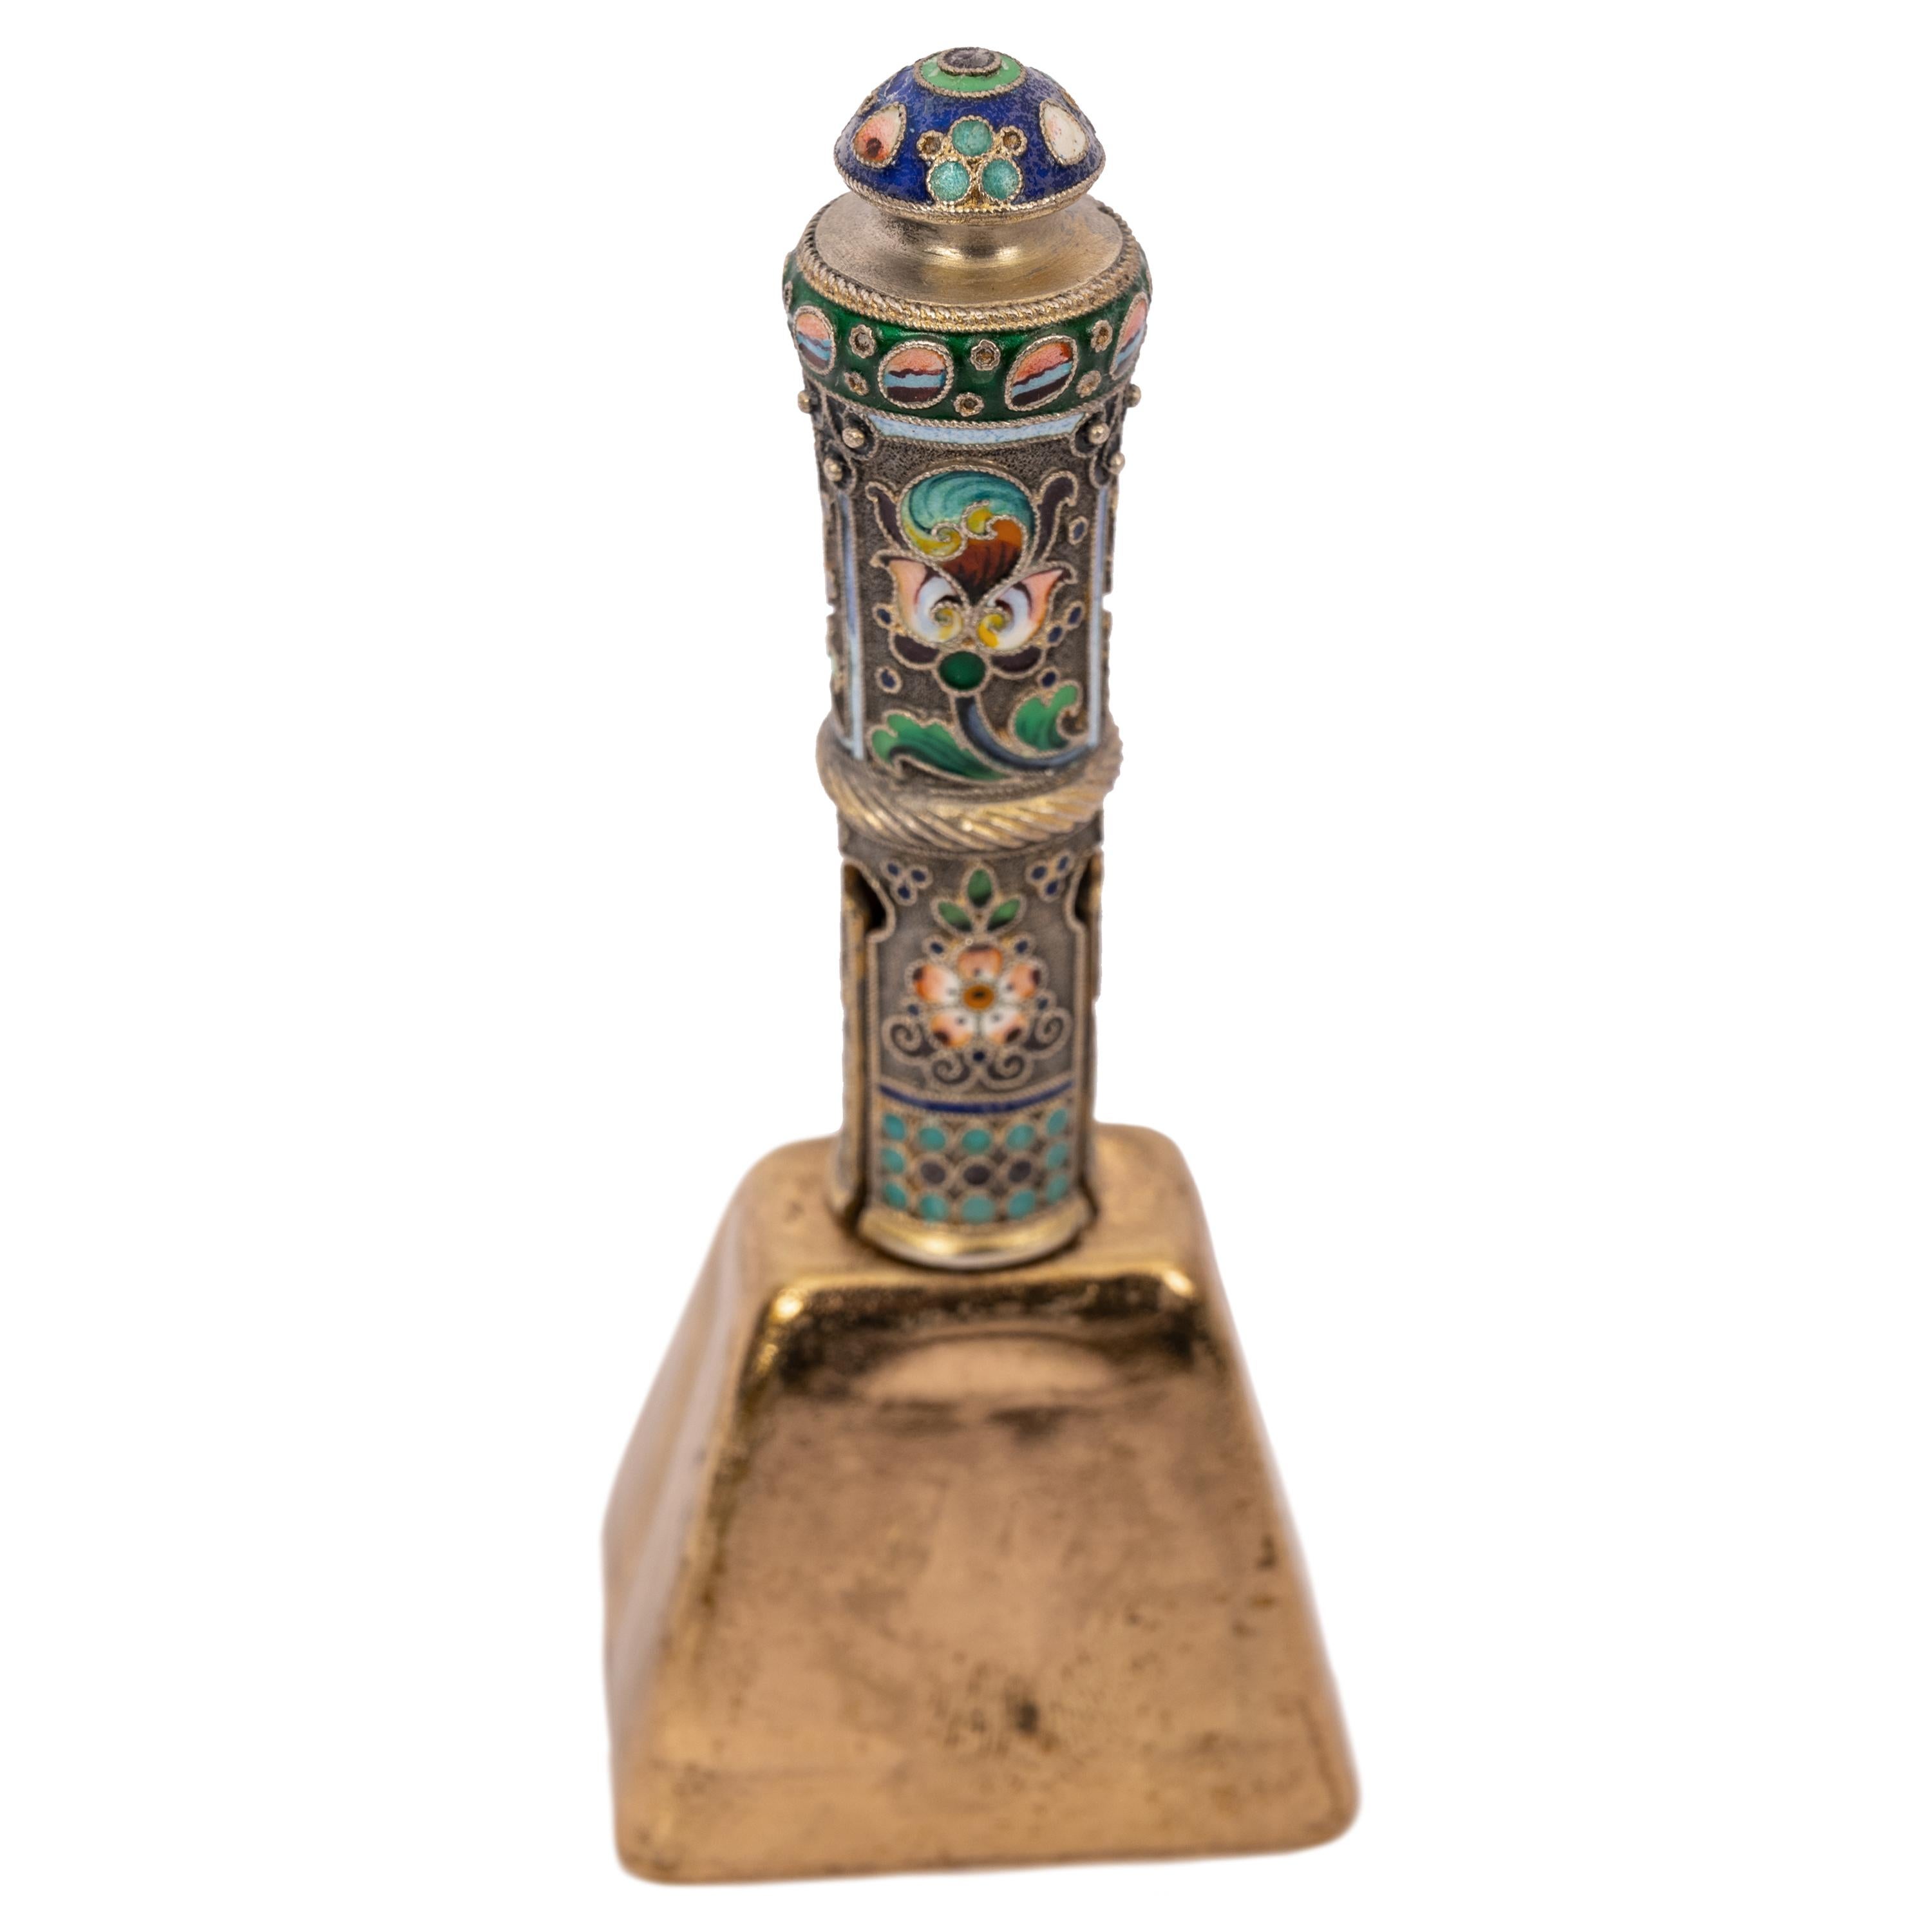 Early 20th Century Antique Russian Imperial Silver Gilt Cloisonné Table Dinner Bell, Moscow, 1908